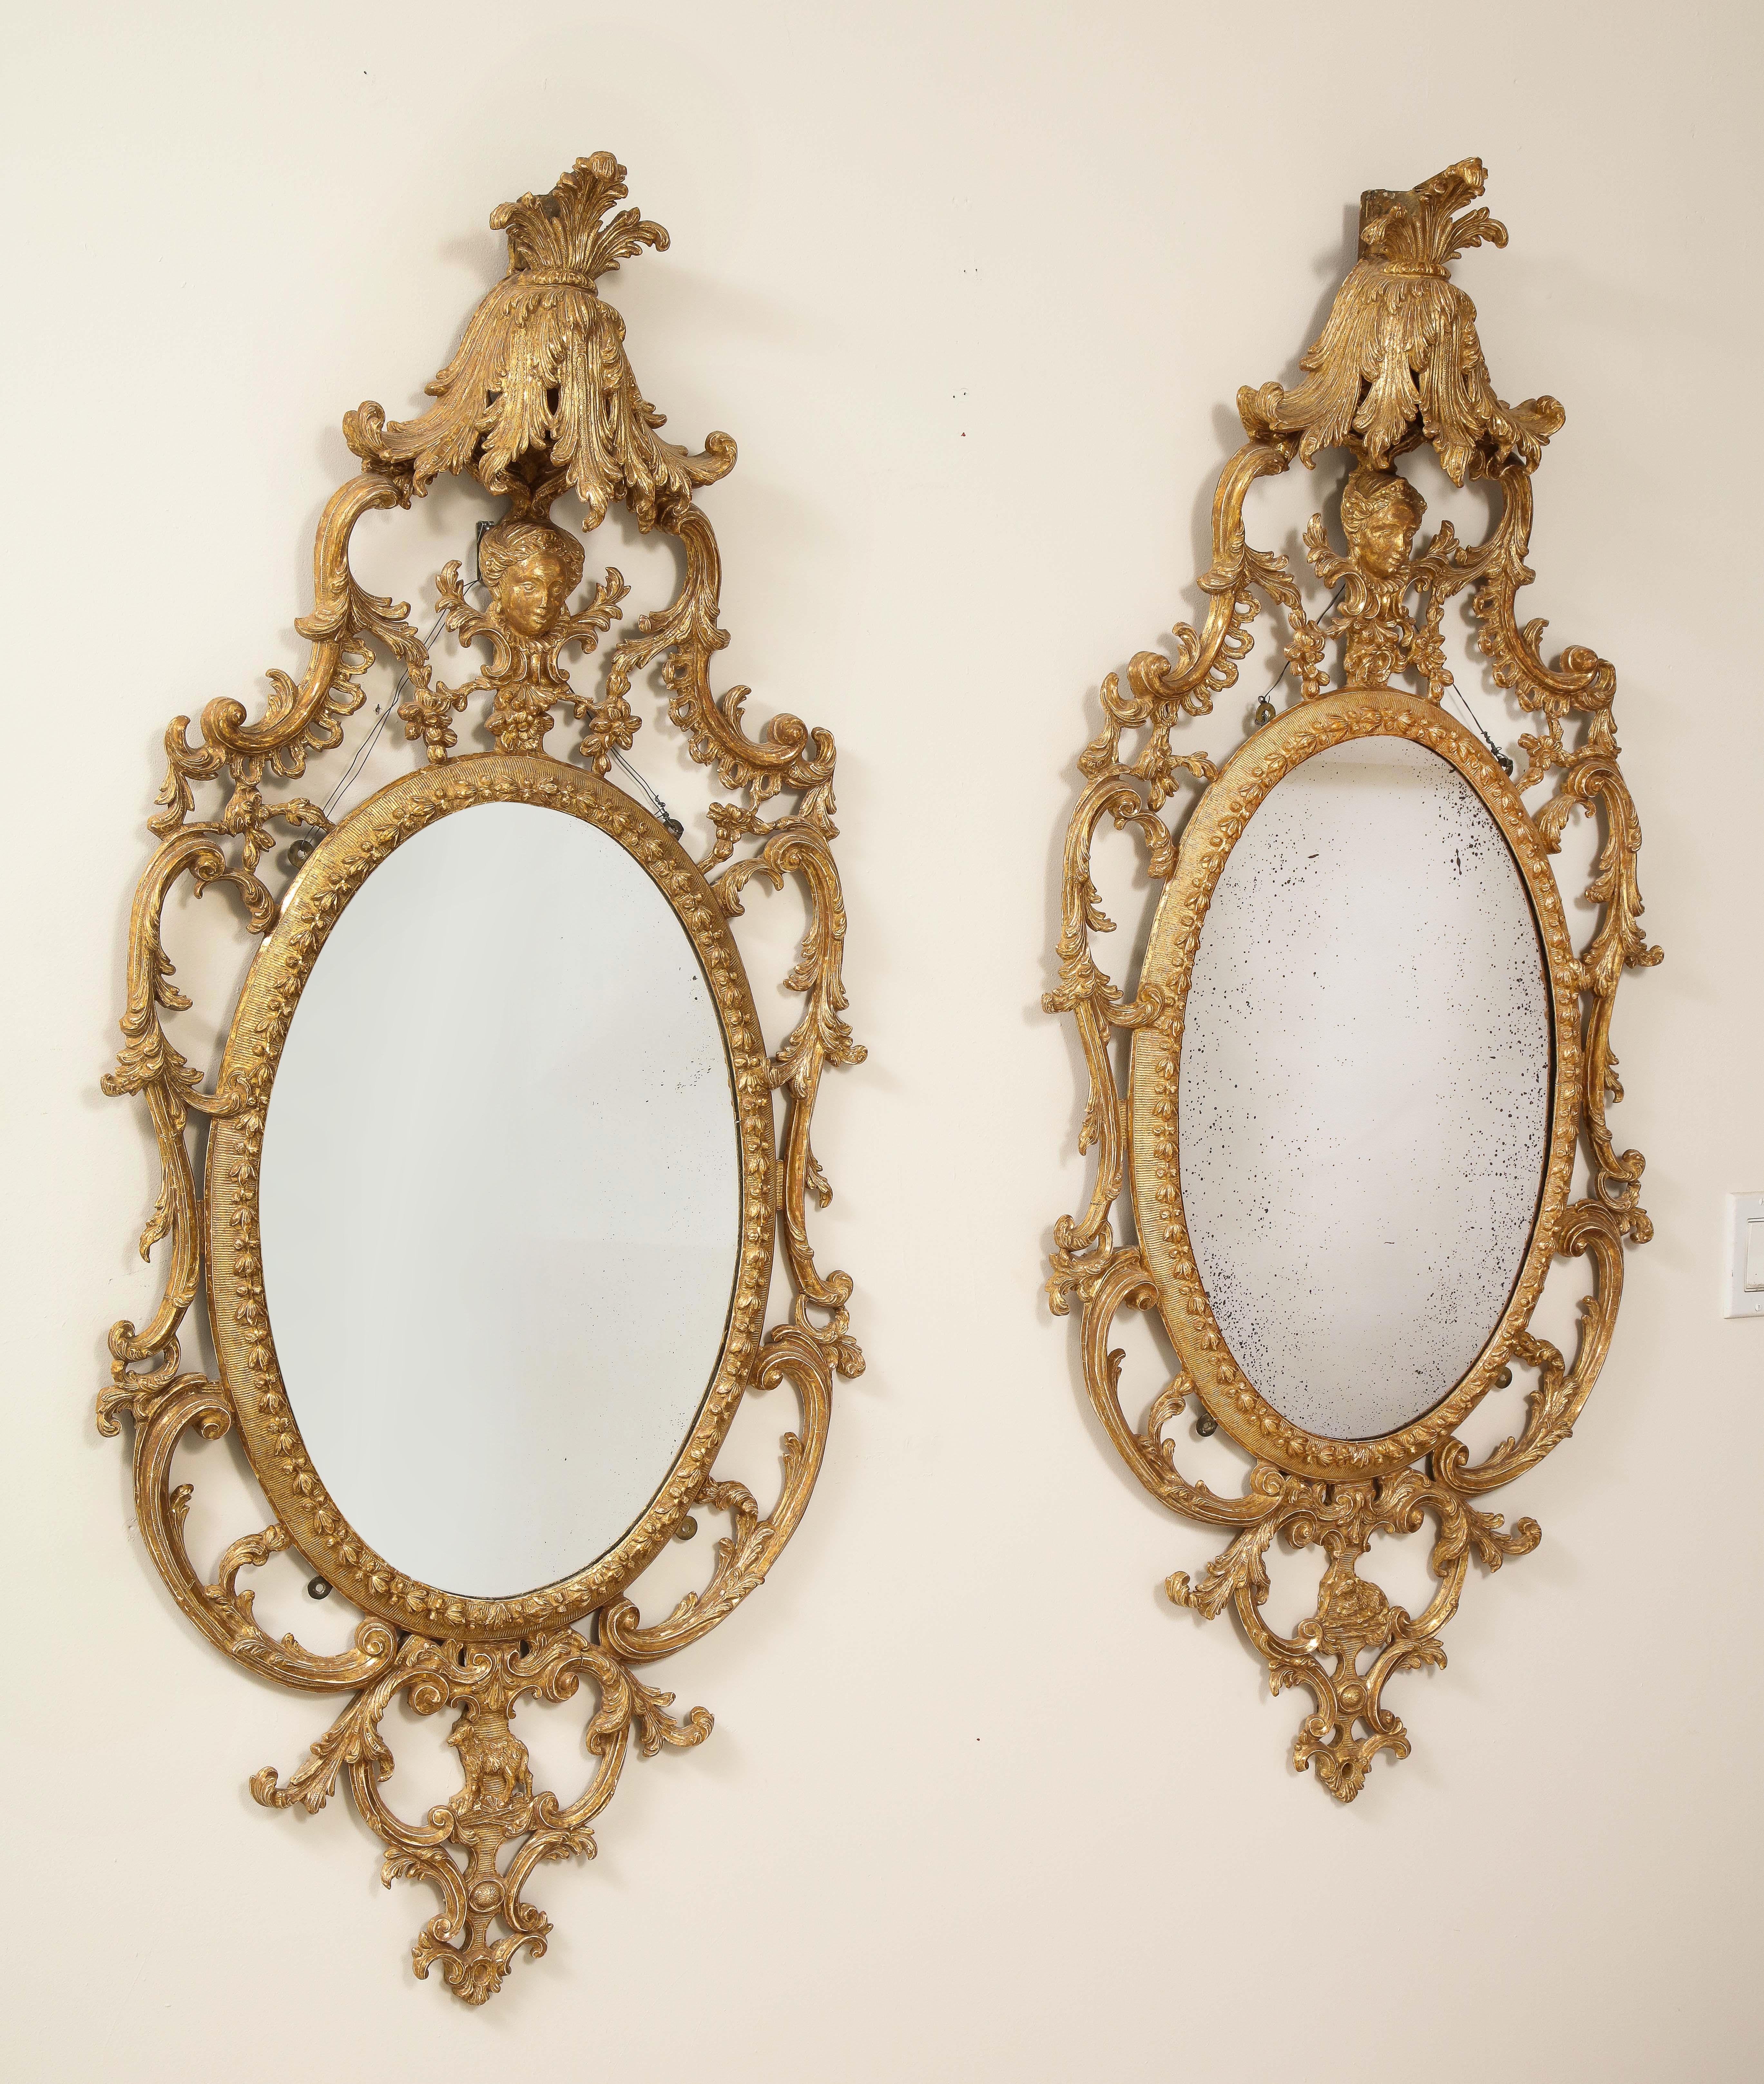 A fantastic and extremely rare pair of George III period gilt Carton-Pierre and giltwood oval mirrors in the manner of John Linnell. Each mirror is gorgeously hand carved with meticulous detail and fine craftsmanship. The giltwood borders are